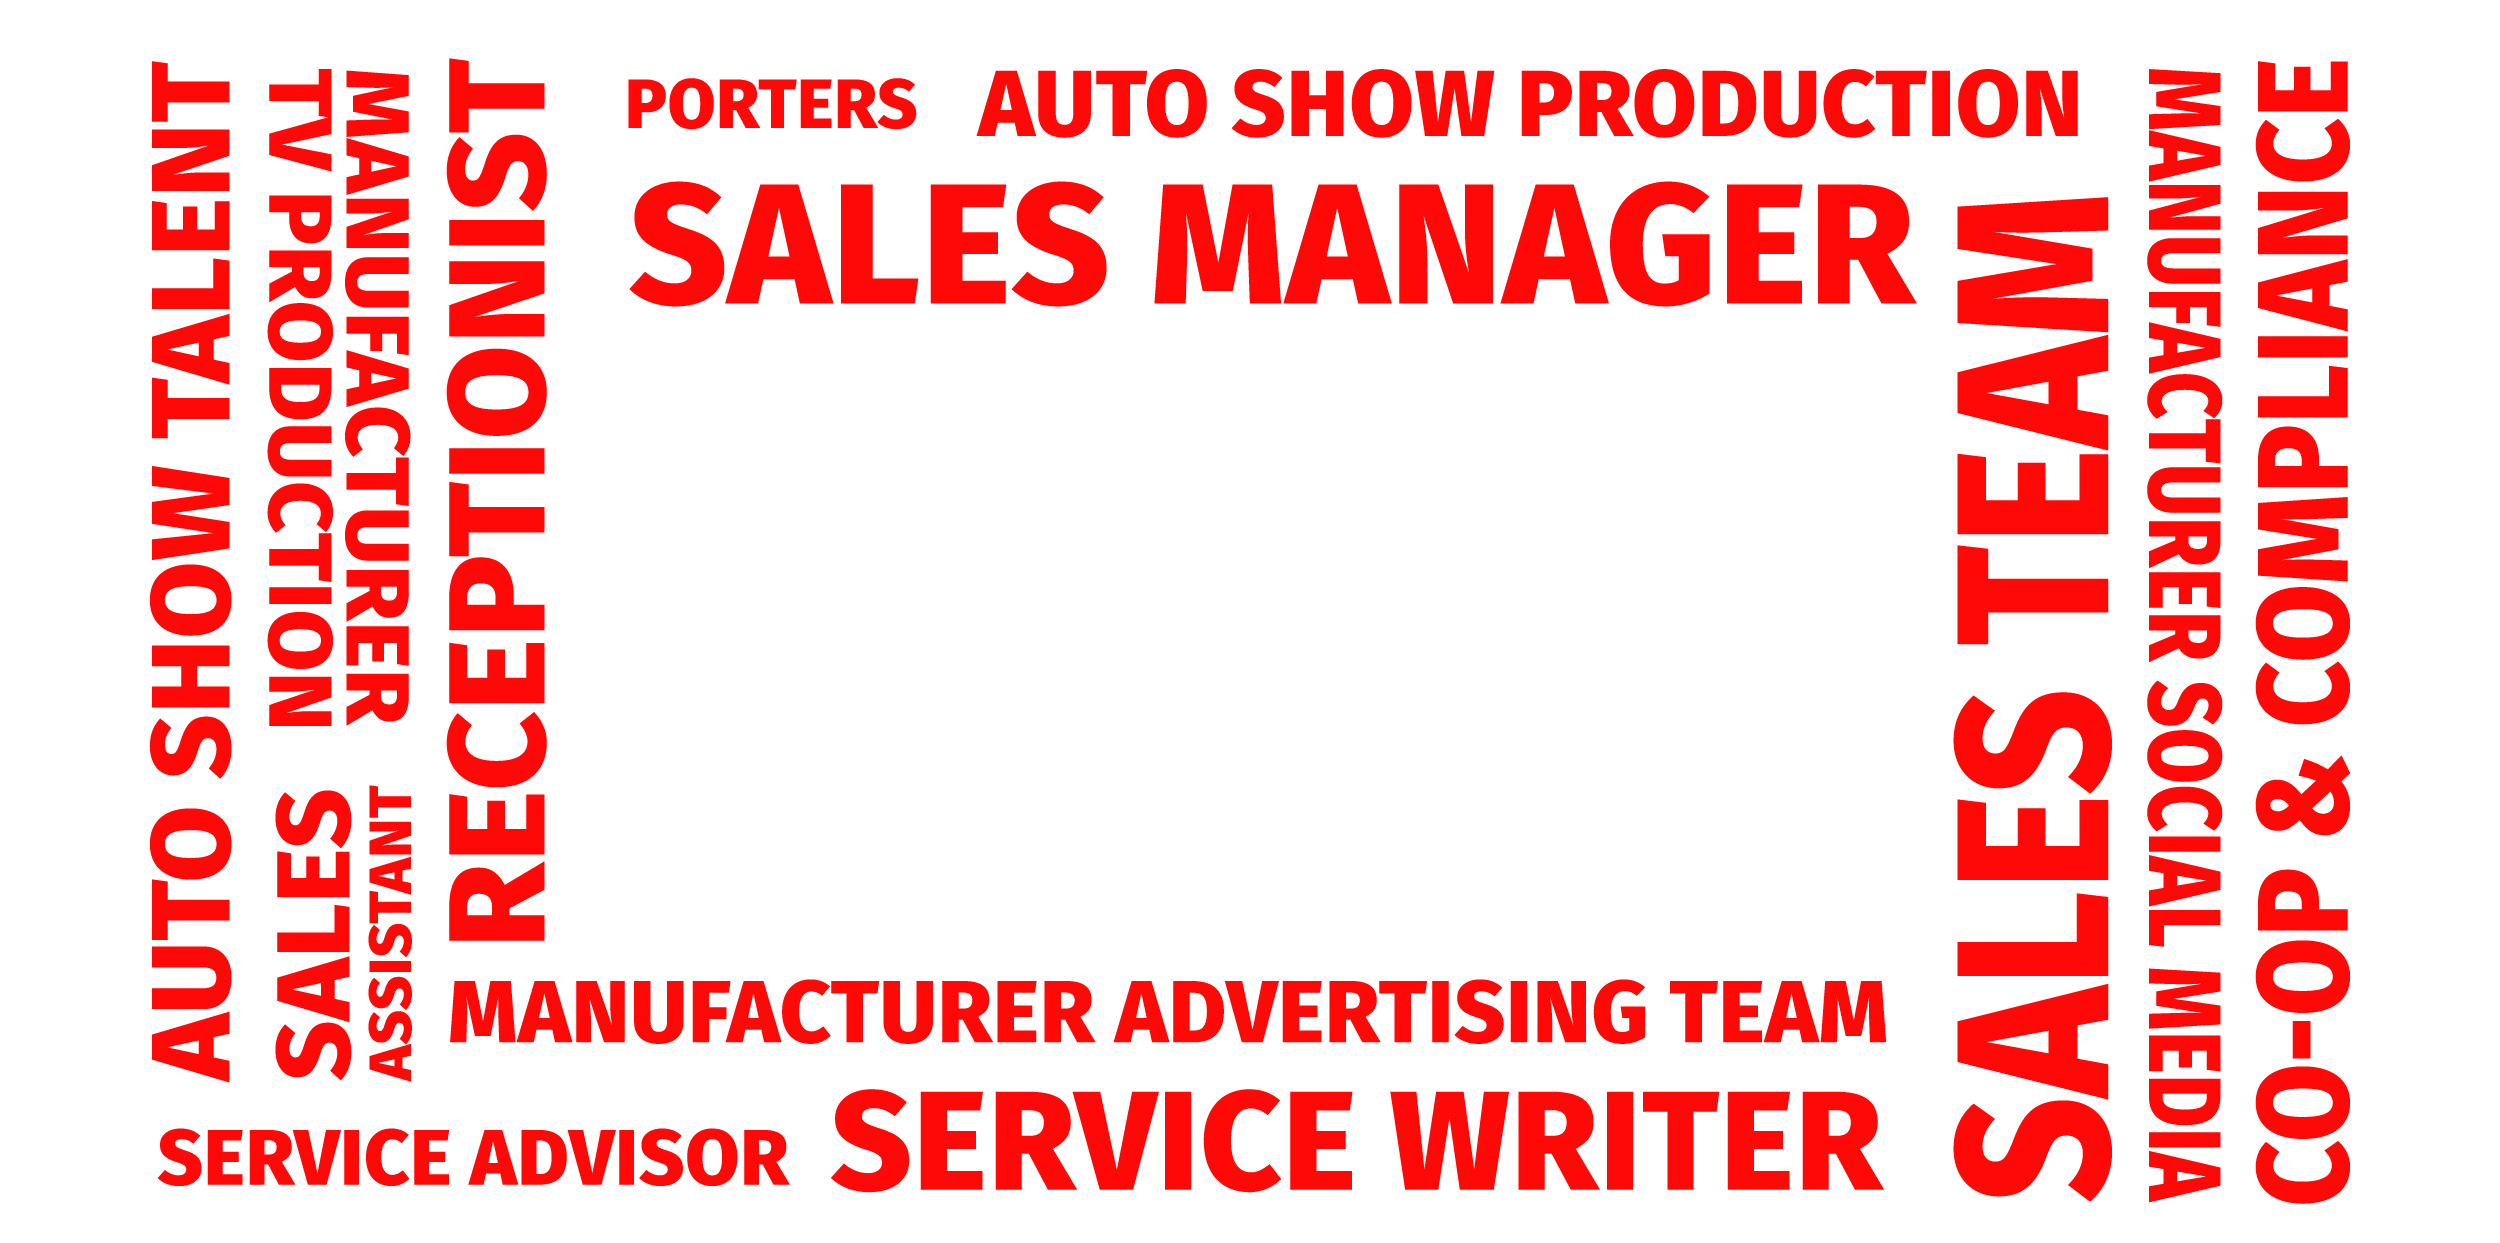 Decades of Automotive Experience